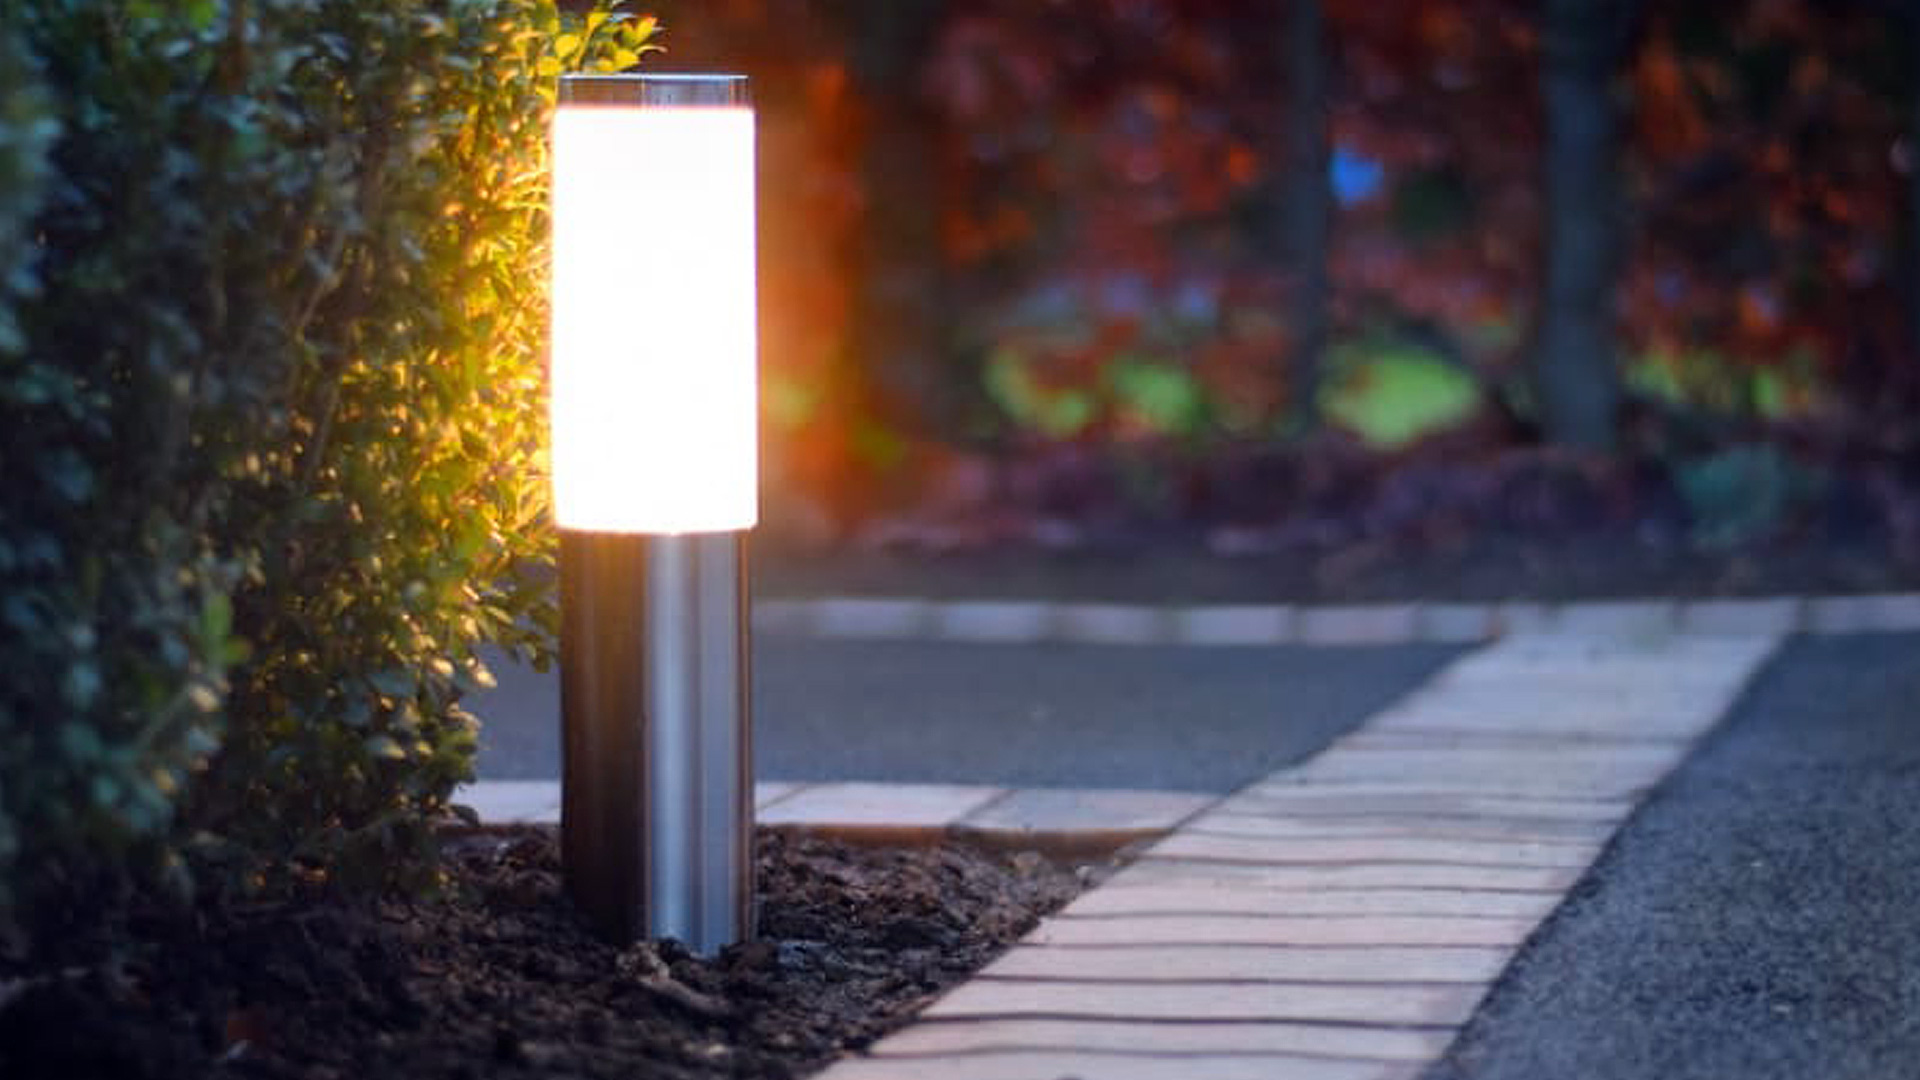 Supreme Resin Driveways -  Our expert garden light installation service can deliver truly exceptional evening ambiance to any garden. Our Garden Lighting services cover all of Greater Manchester including Salford, Oldham, Rochdale, Stockport and many more. 